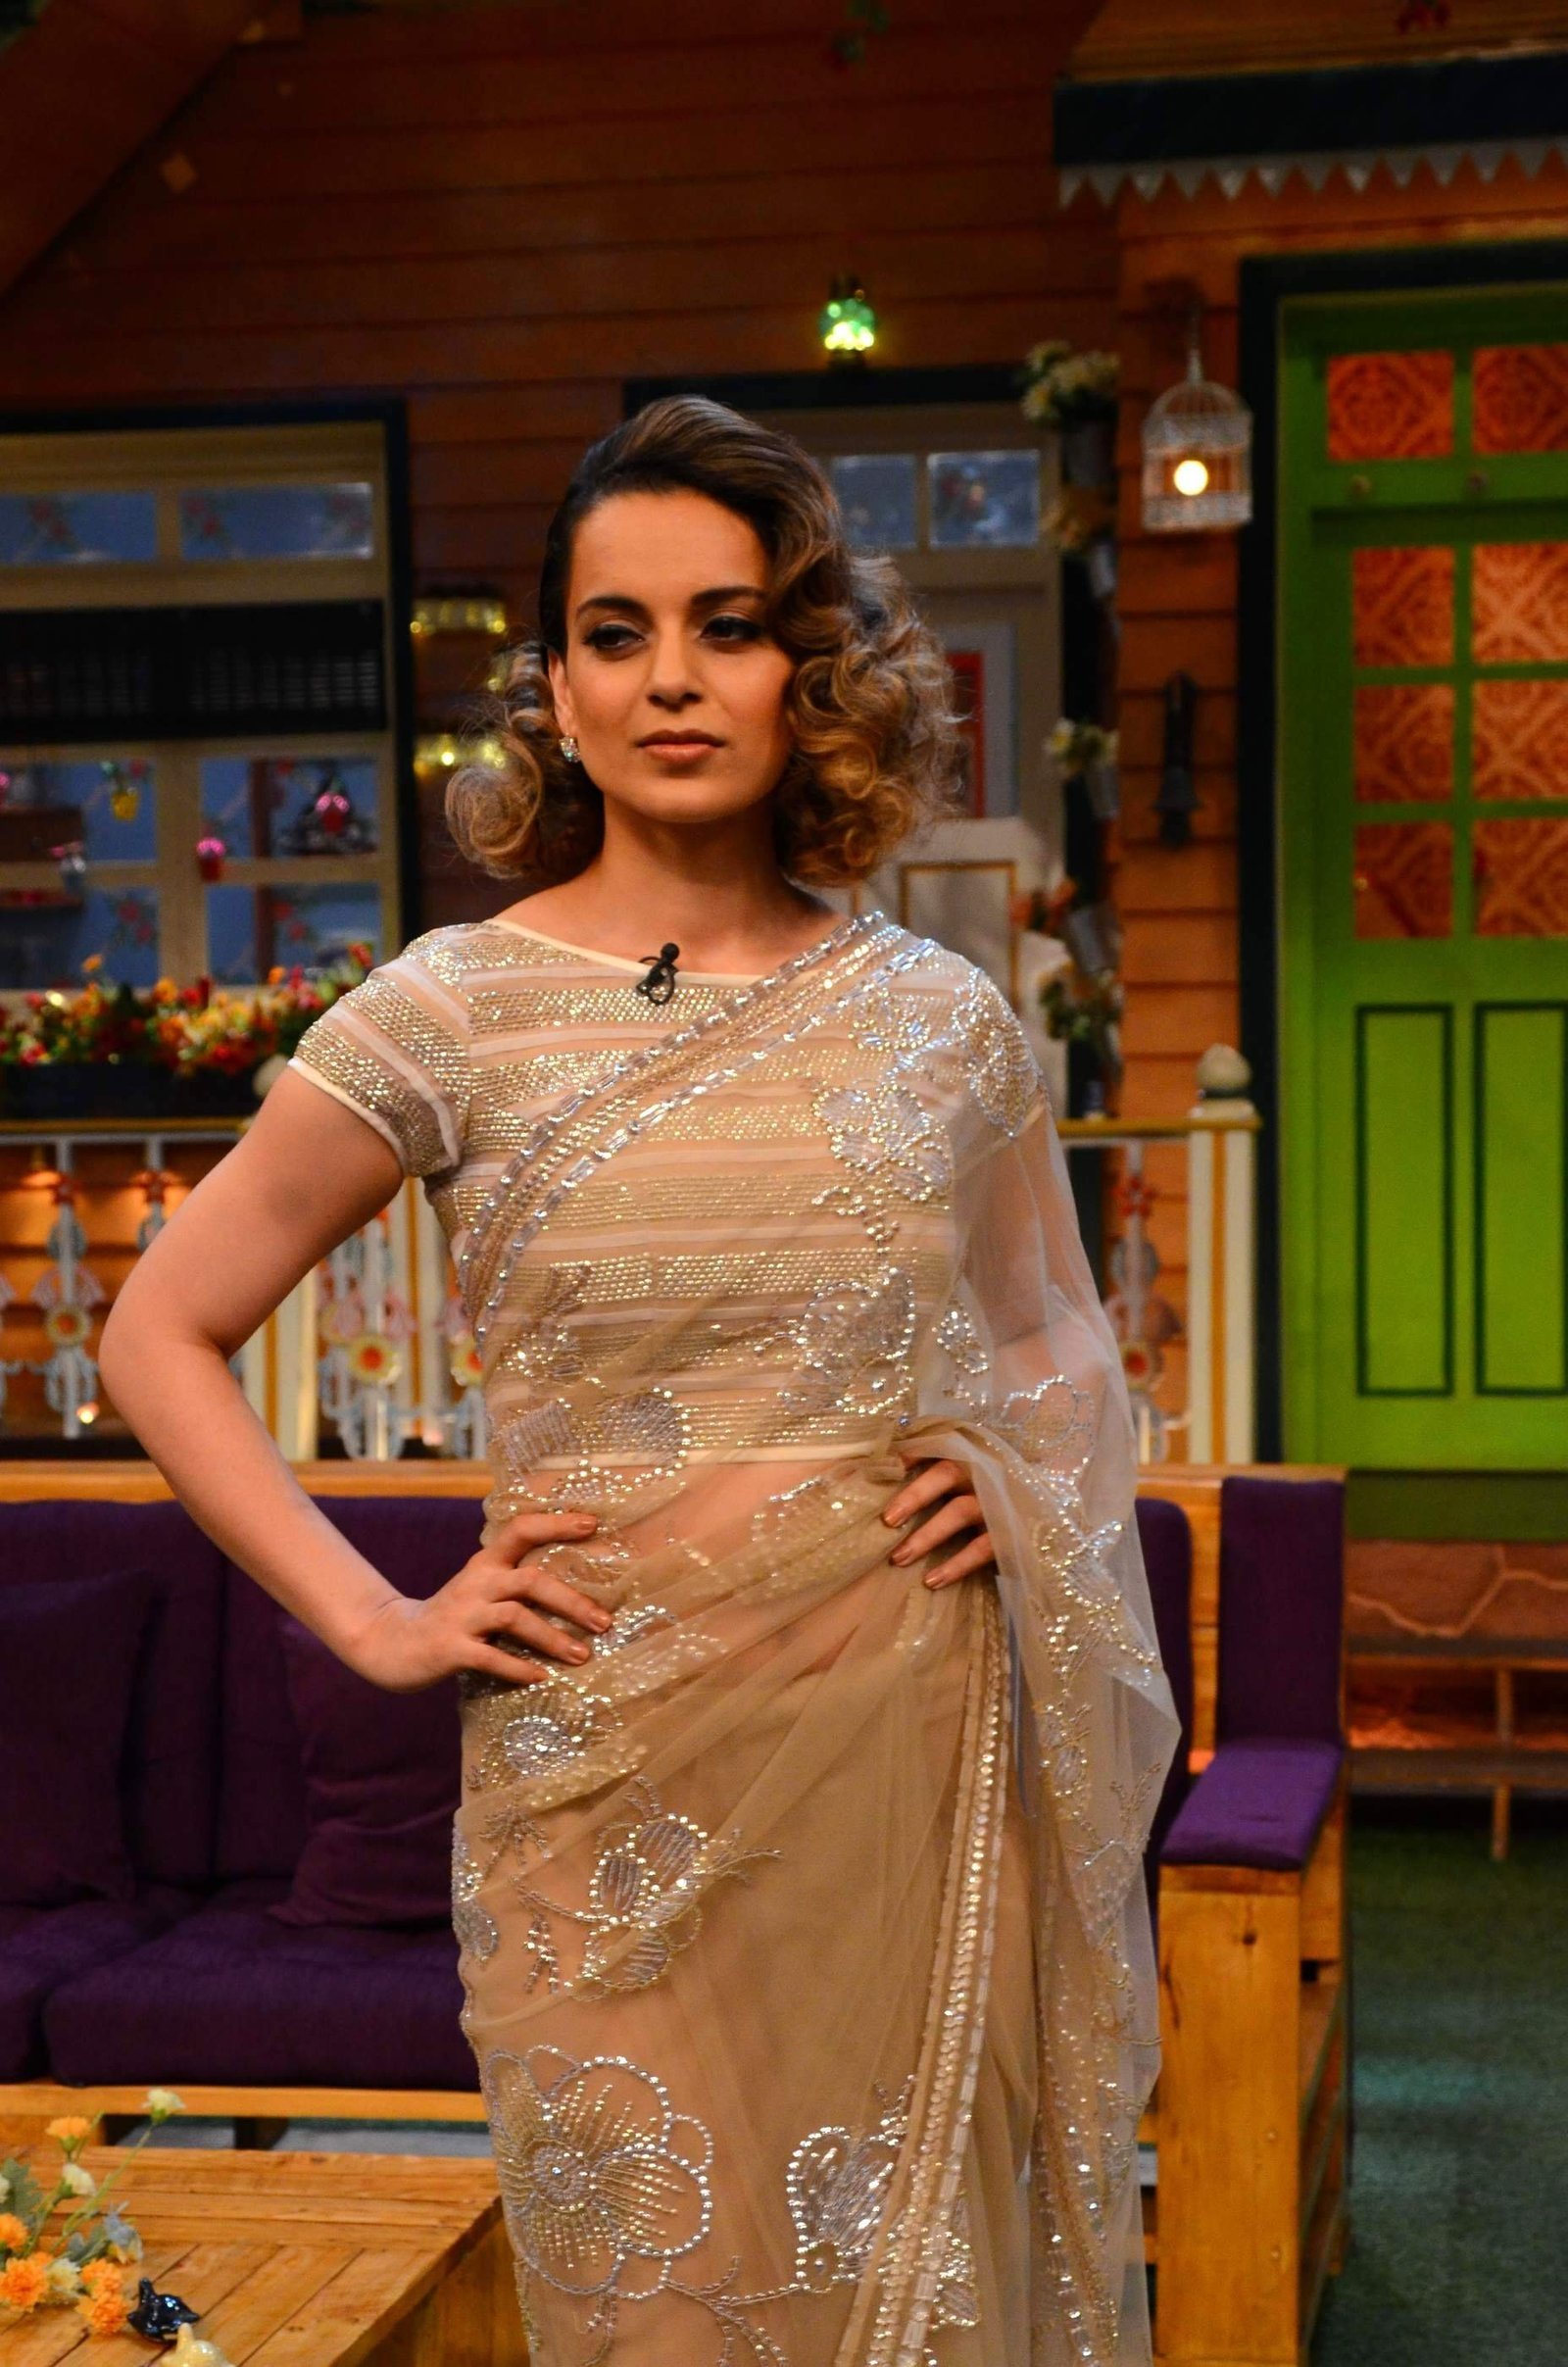 Kangana Ranaut - Promotion of film Rangoon on the sets of The Kapil Sharma Show Images | Picture 1471180